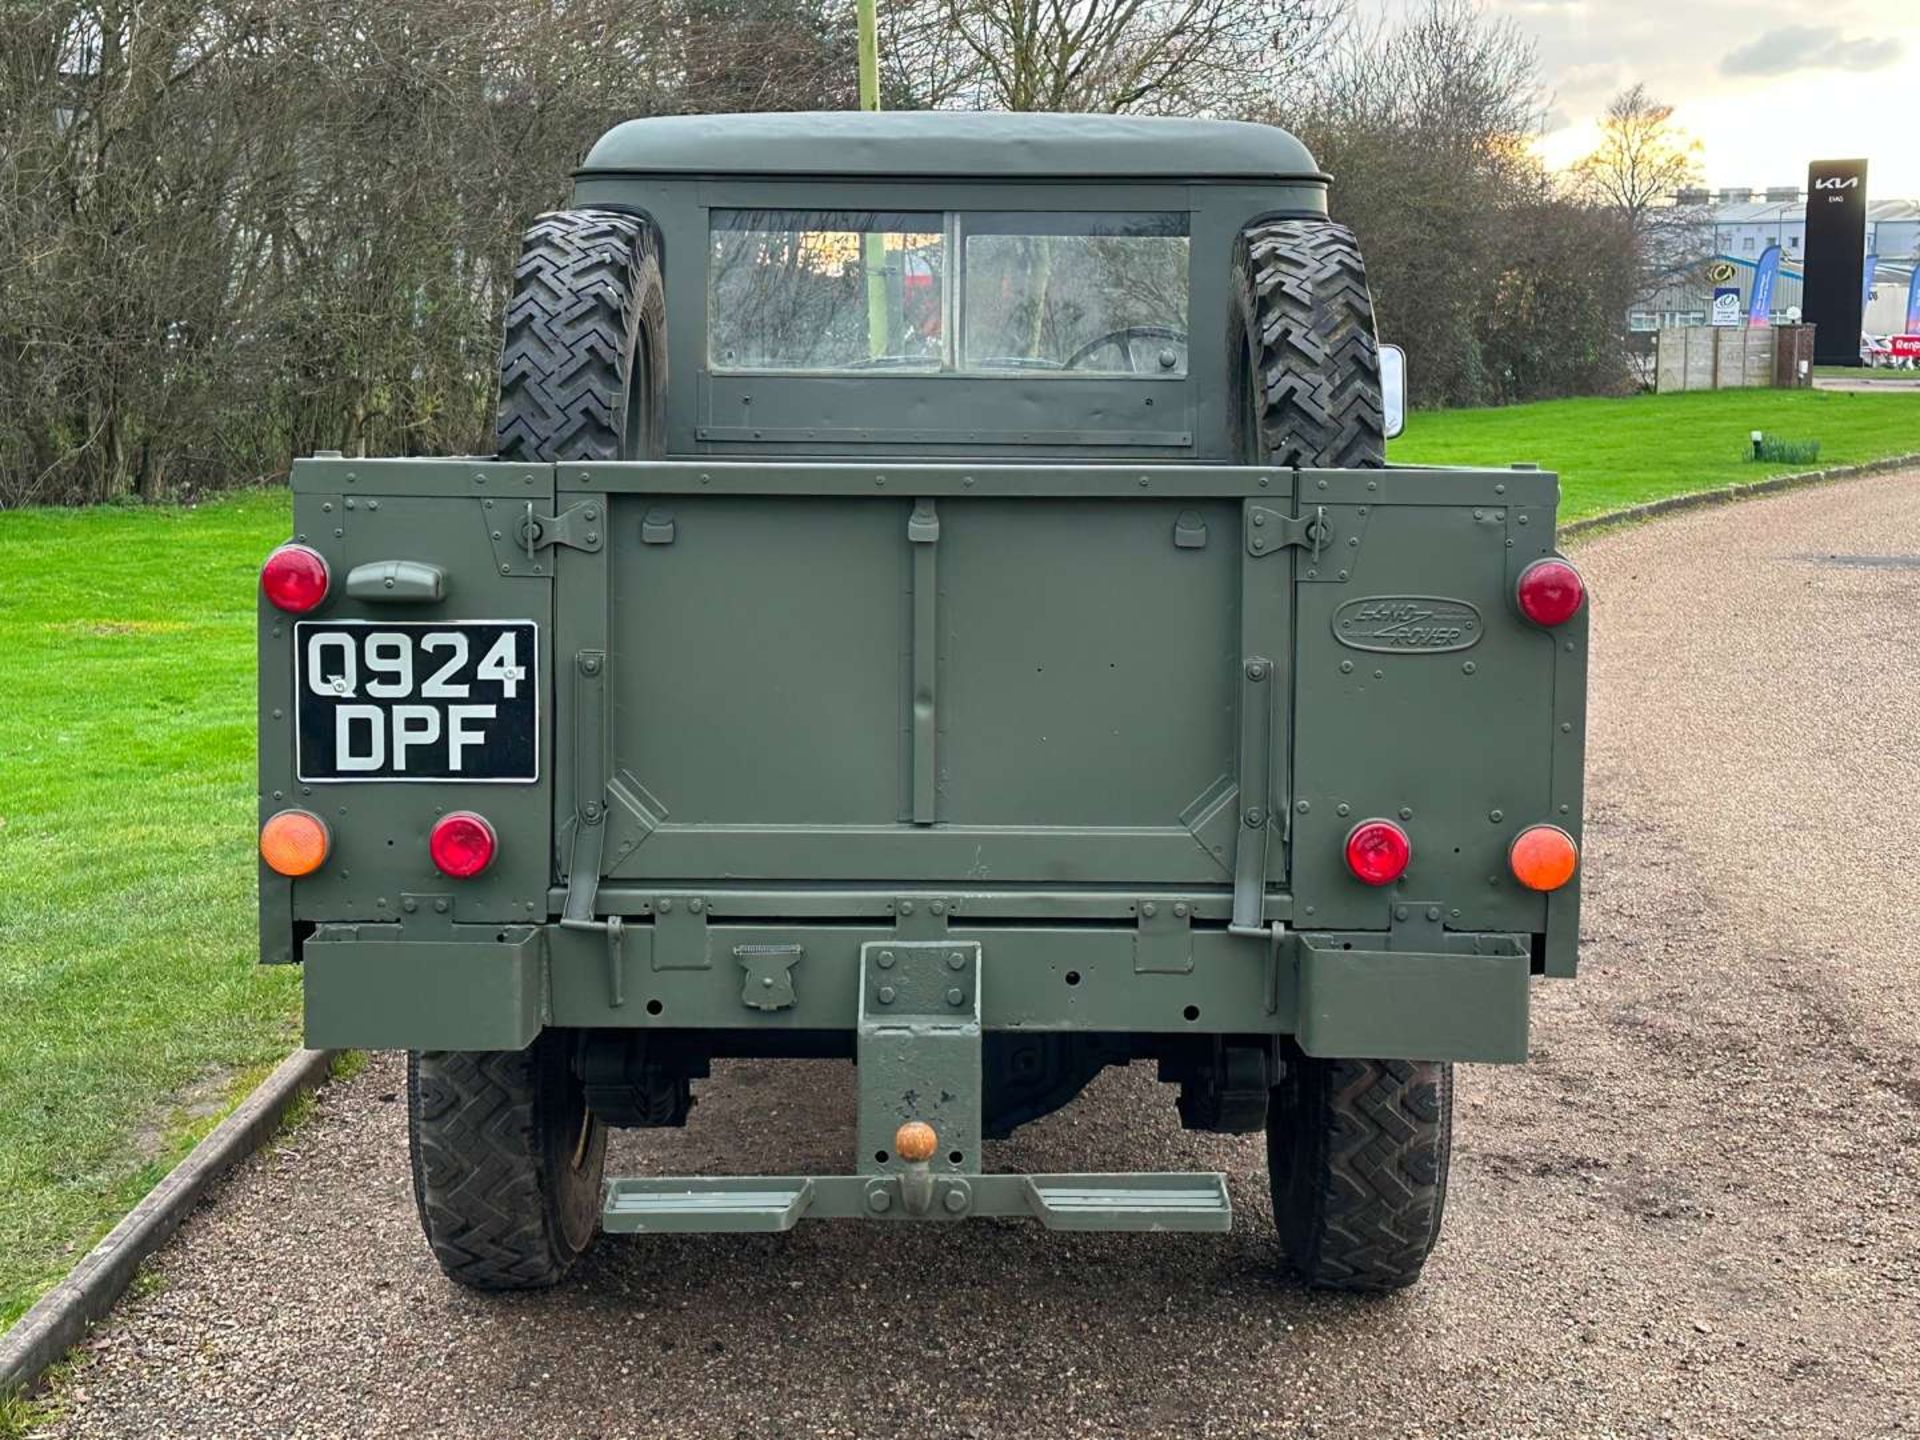 1992 LAND ROVER SERIES III PICK-UP - Image 6 of 25